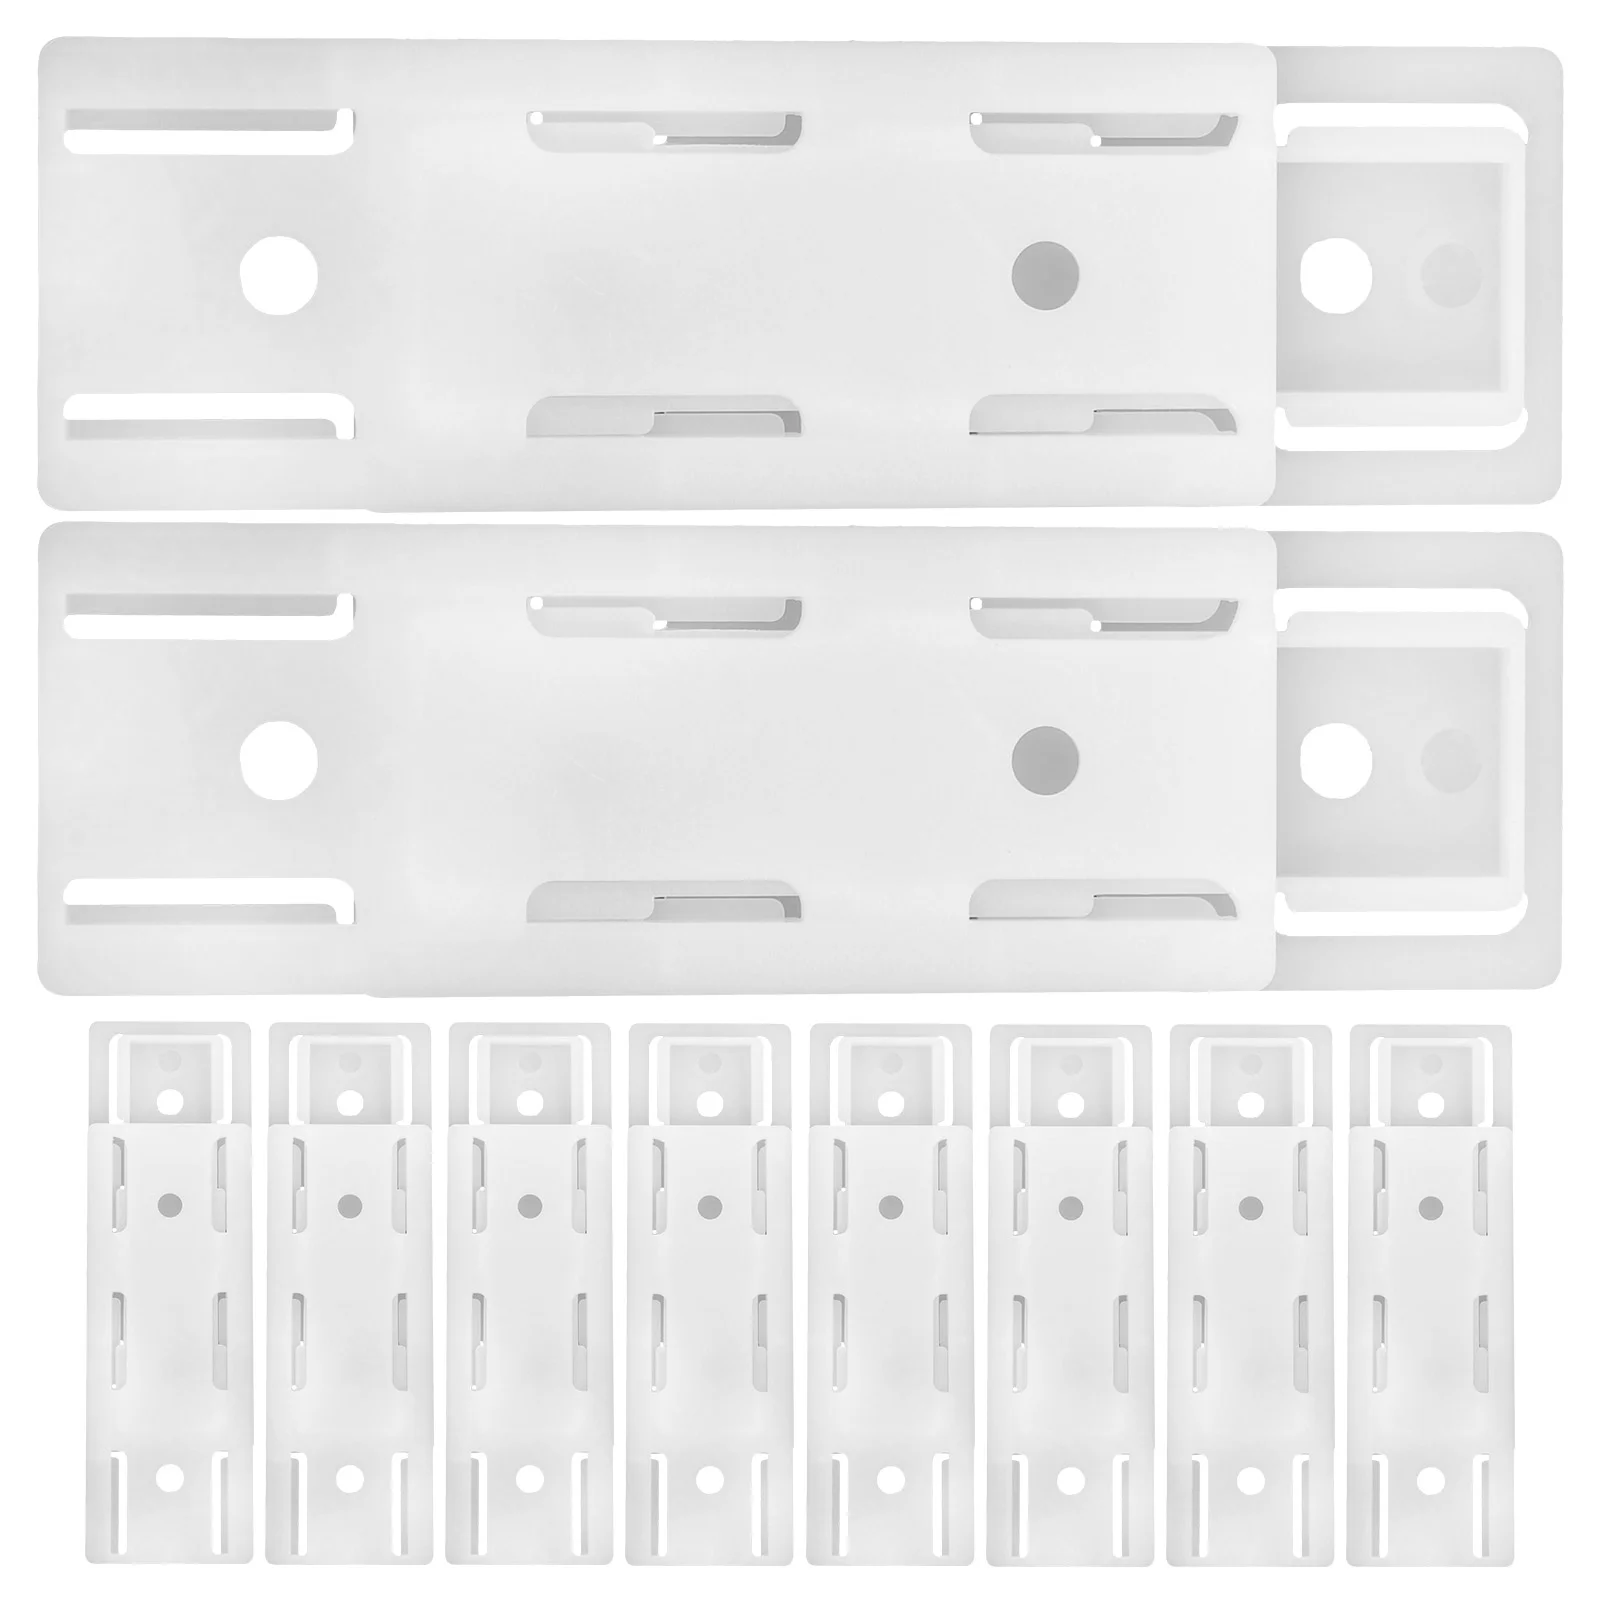 

10PCS ABS Row Socket Retainer Wall Hanging Socket Storage Holder Household Extension Socket Stand Punch Free Socket Fixer Wall